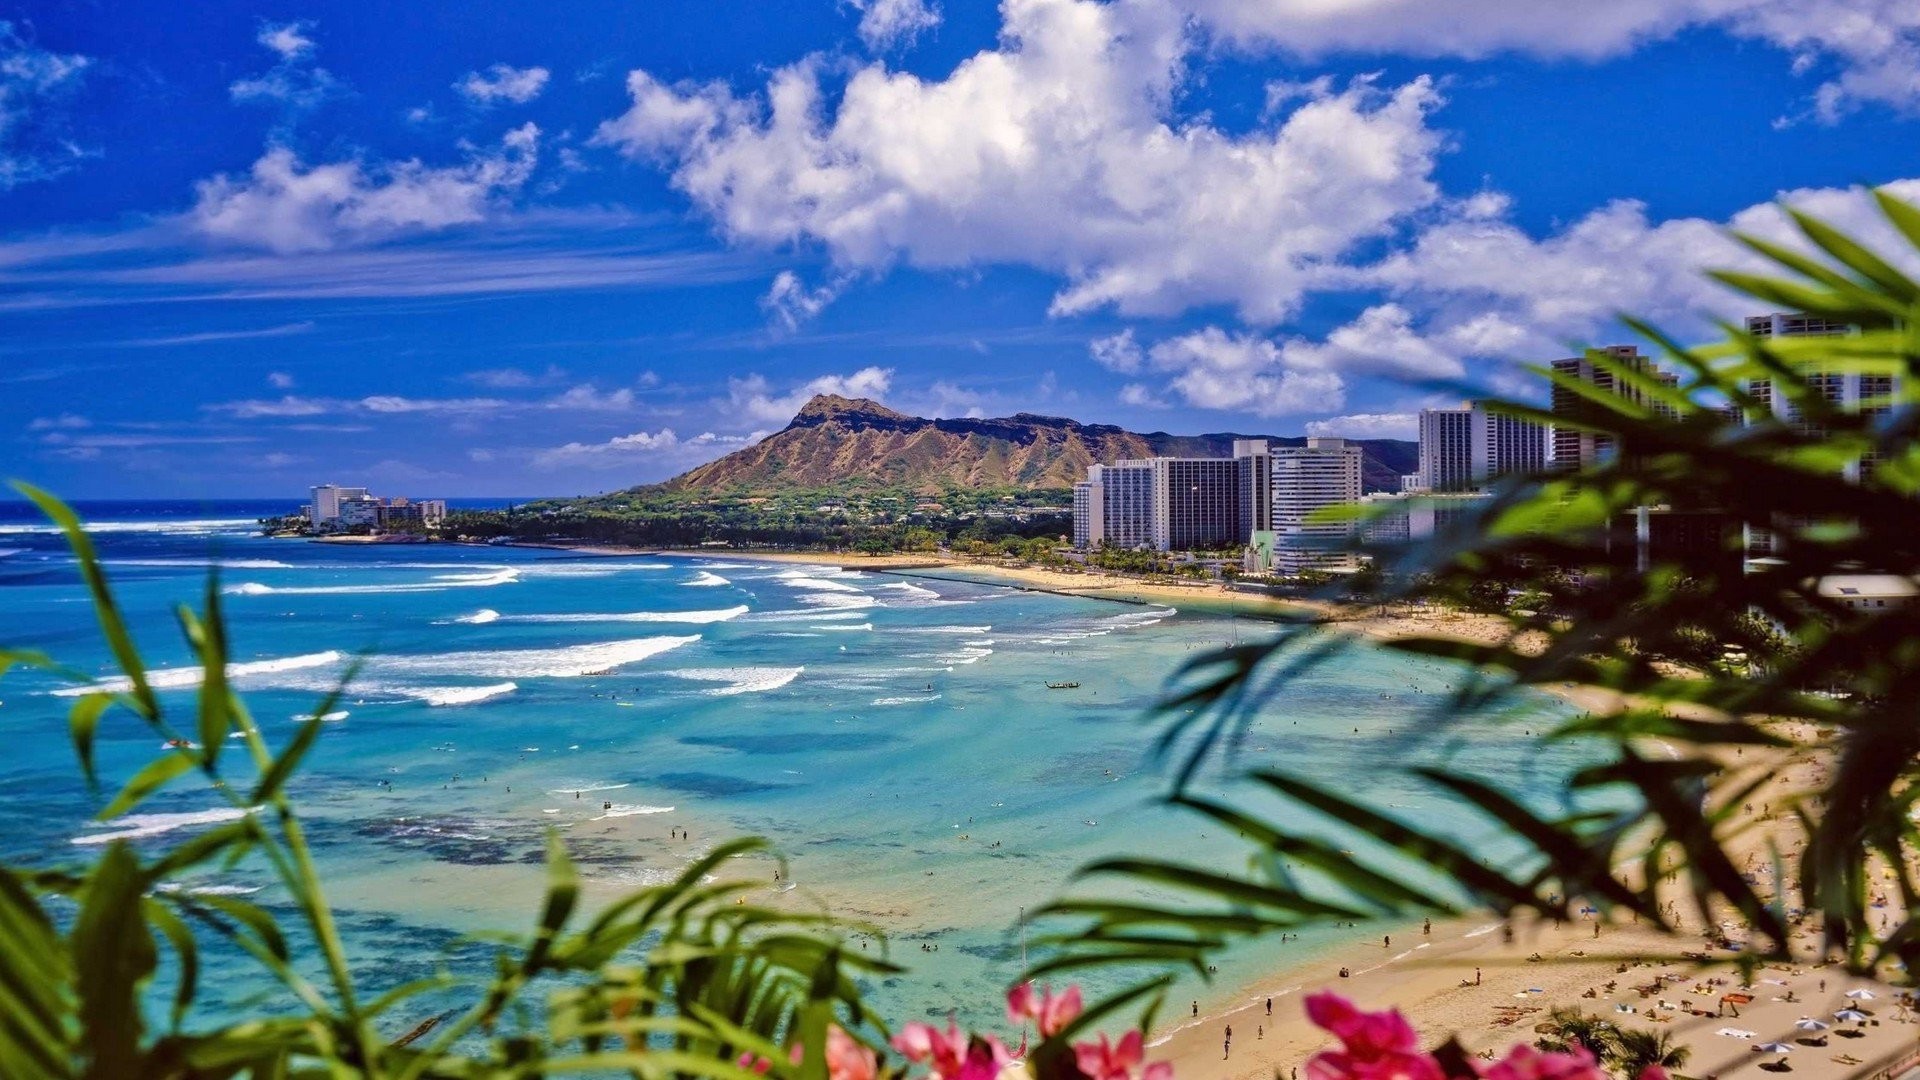 Free Download 61 Waikiki Beach Wallpapers On Wallpaperplay 19x1080 For Your Desktop Mobile Tablet Explore 58 Waikiki Wallpaper Ipad Waikiki Wallpaper Ipad Waikiki Wallpapers Waikiki Wallpaper